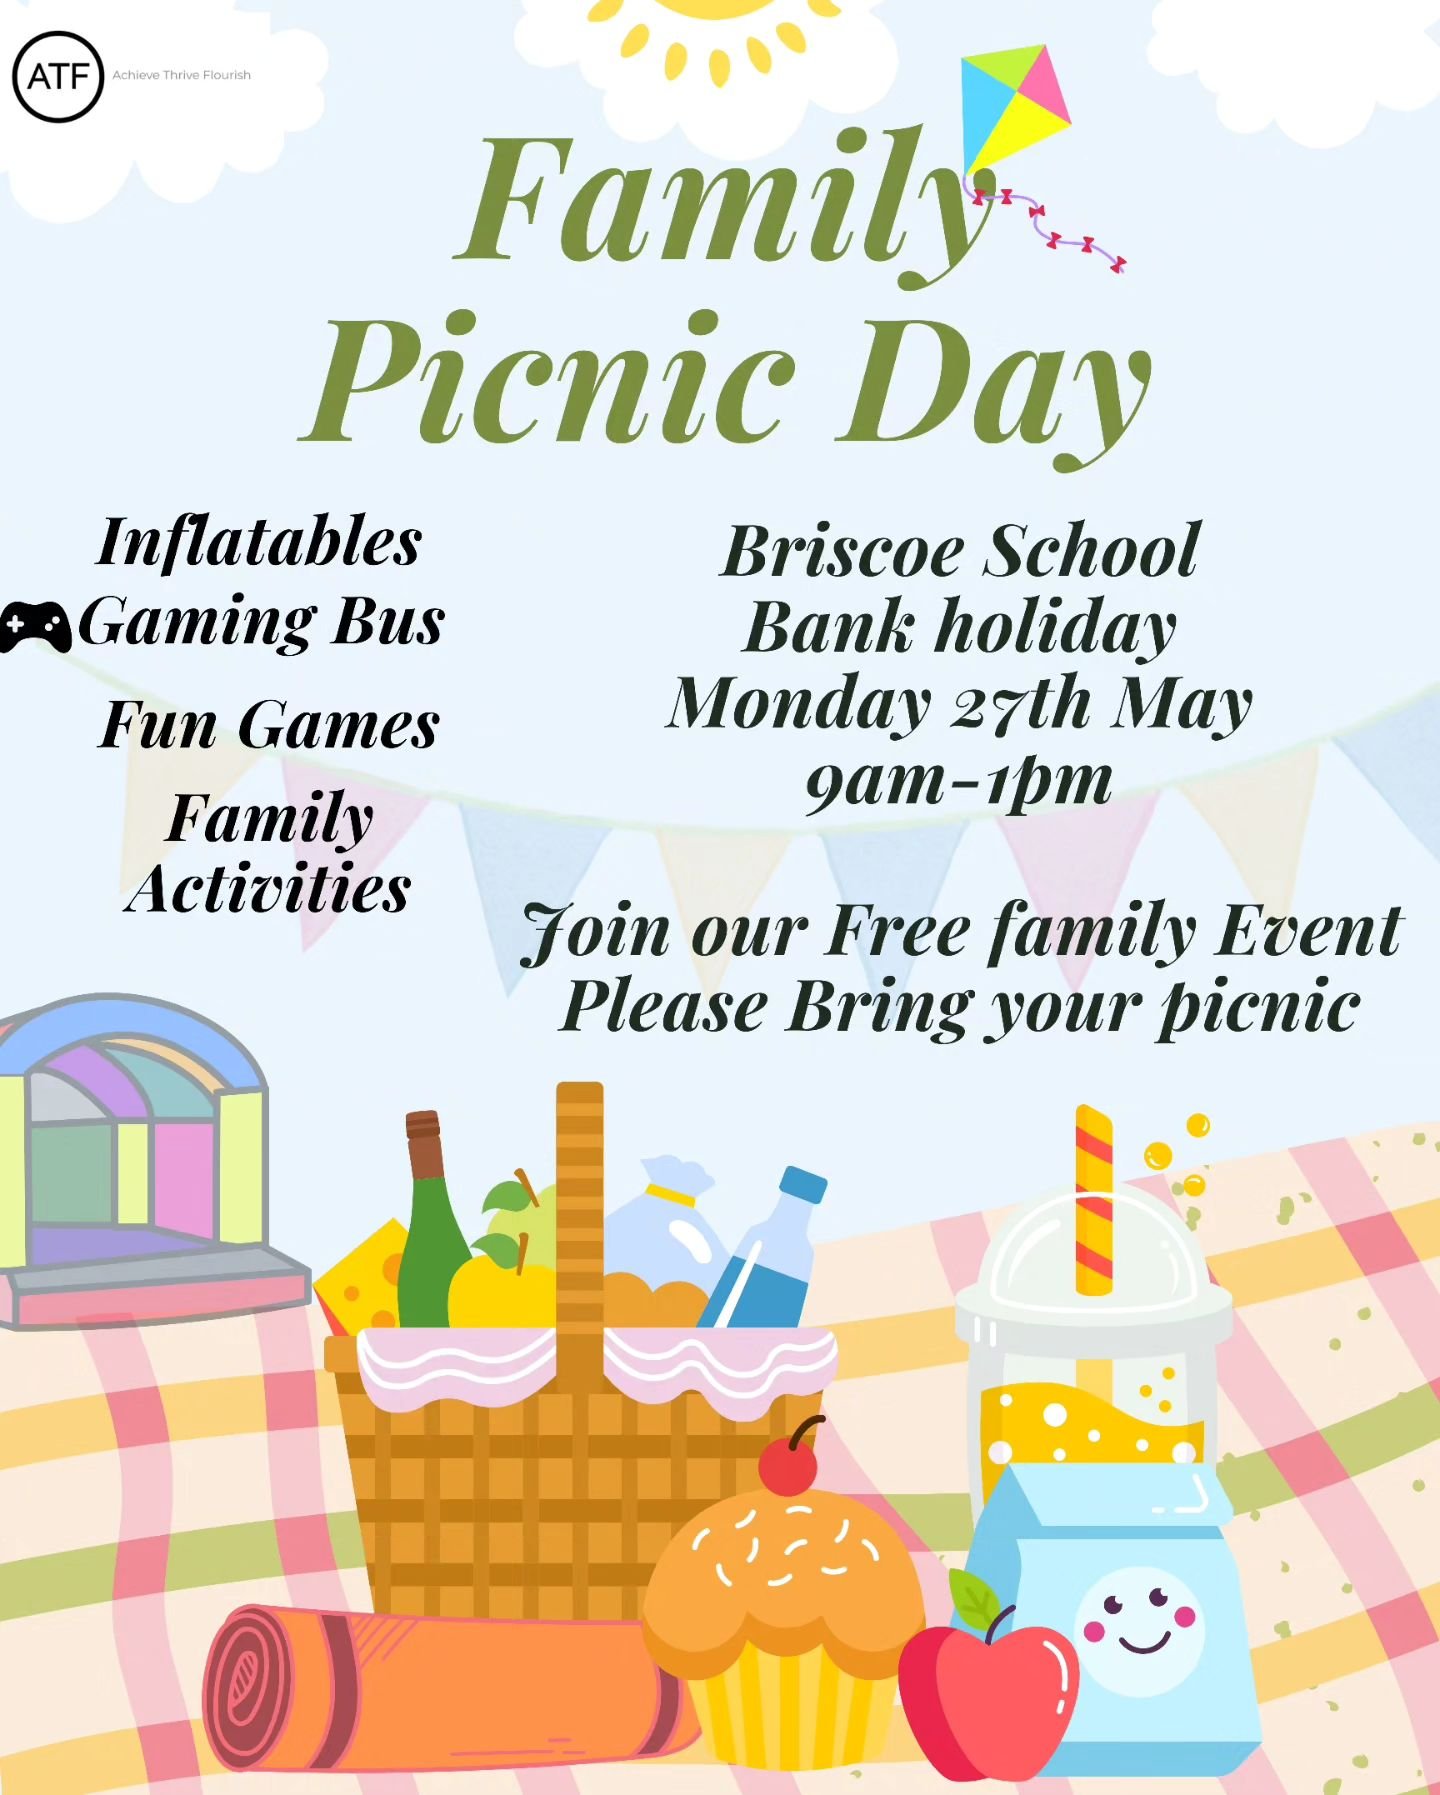 🚨🚨The Briscoe family event is the 27th May, NOT this Monday 🚨🚨

⭐️⭐️⭐️⭐️⭐️⭐️⭐️⭐️⭐️⭐️⭐️⭐️⭐️⭐️⭐️⭐️⭐️⭐️⭐️